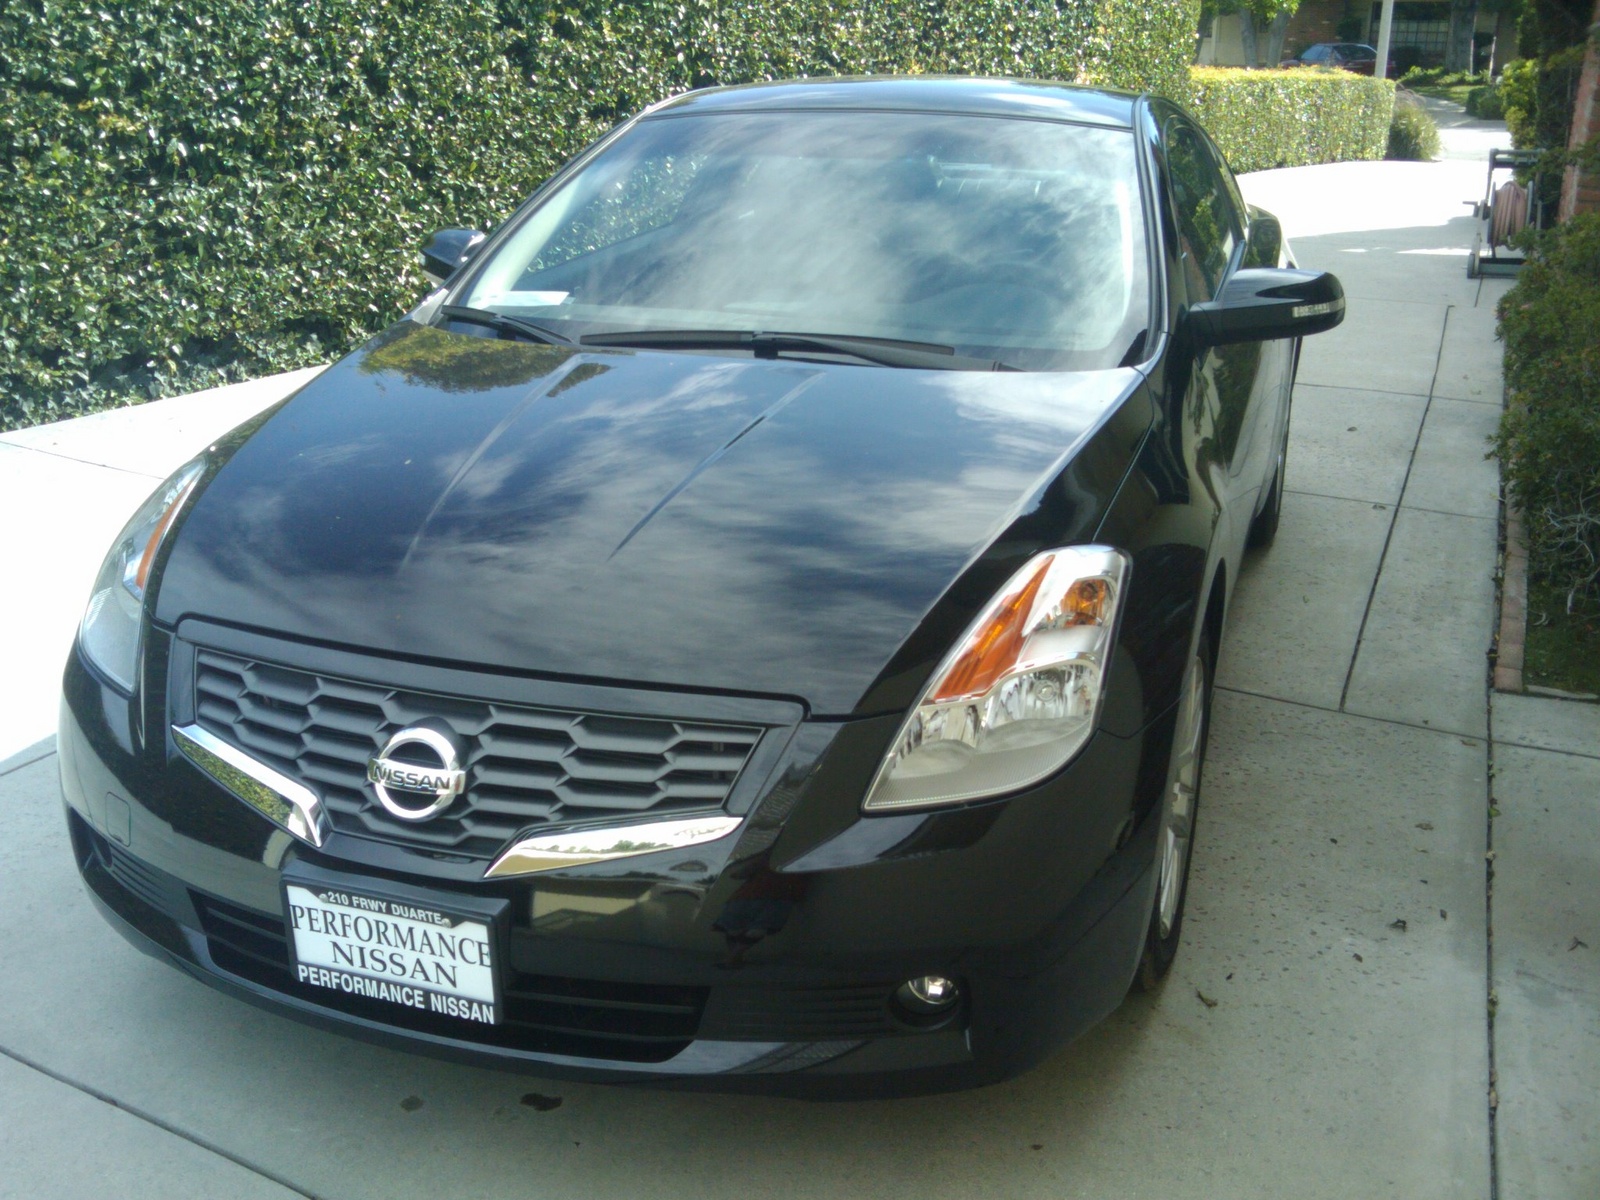 2008 Nissan altima coupe 3.5 review